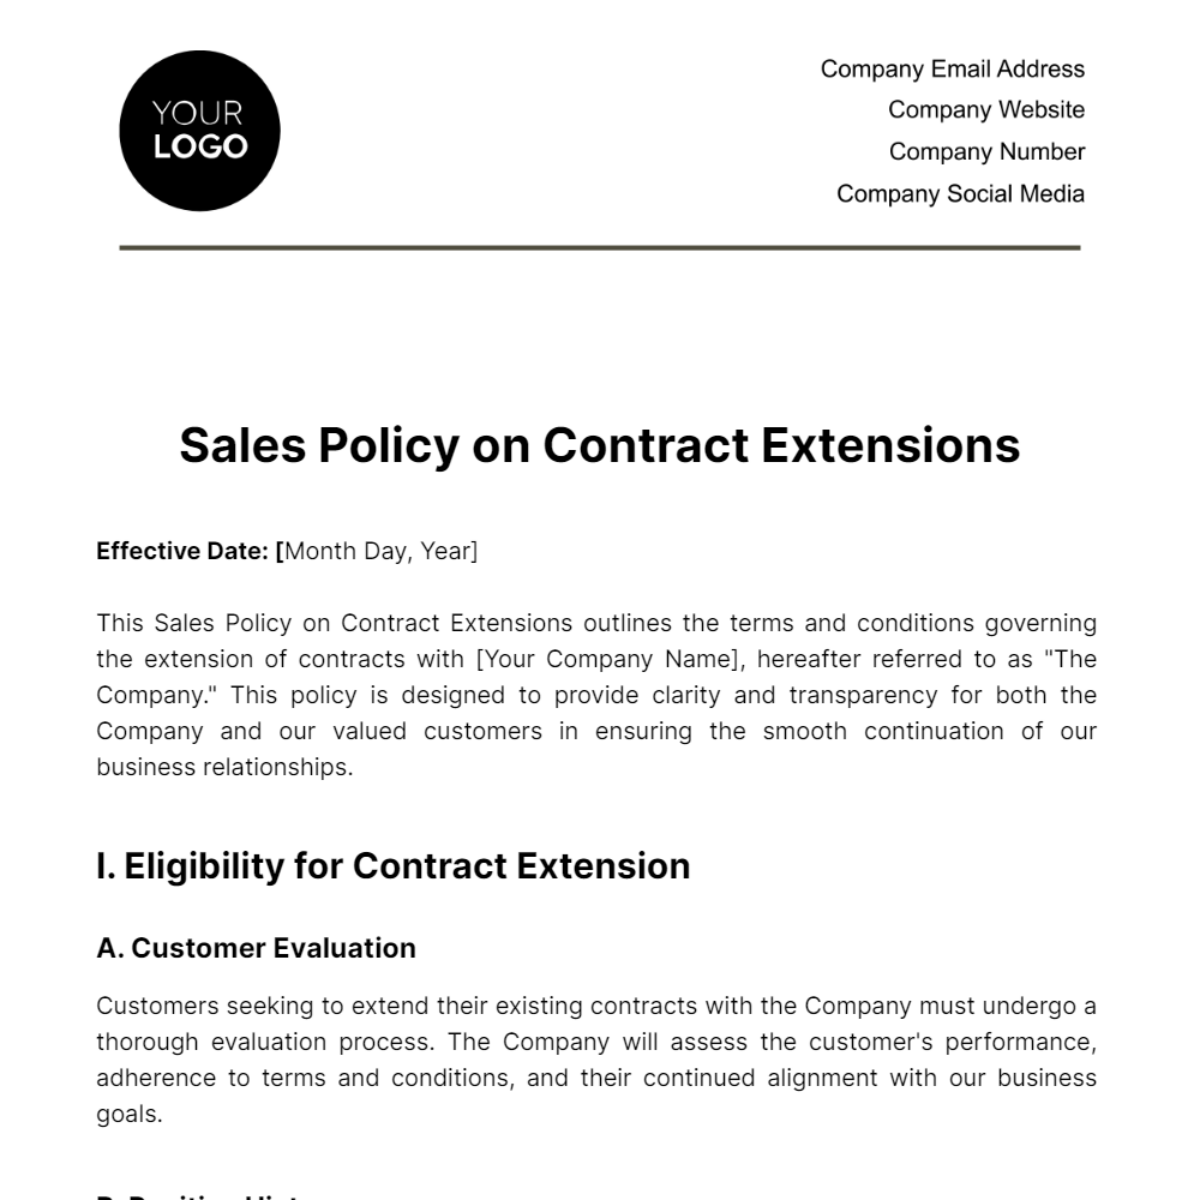 Sales Policy on Contract Extensions Template